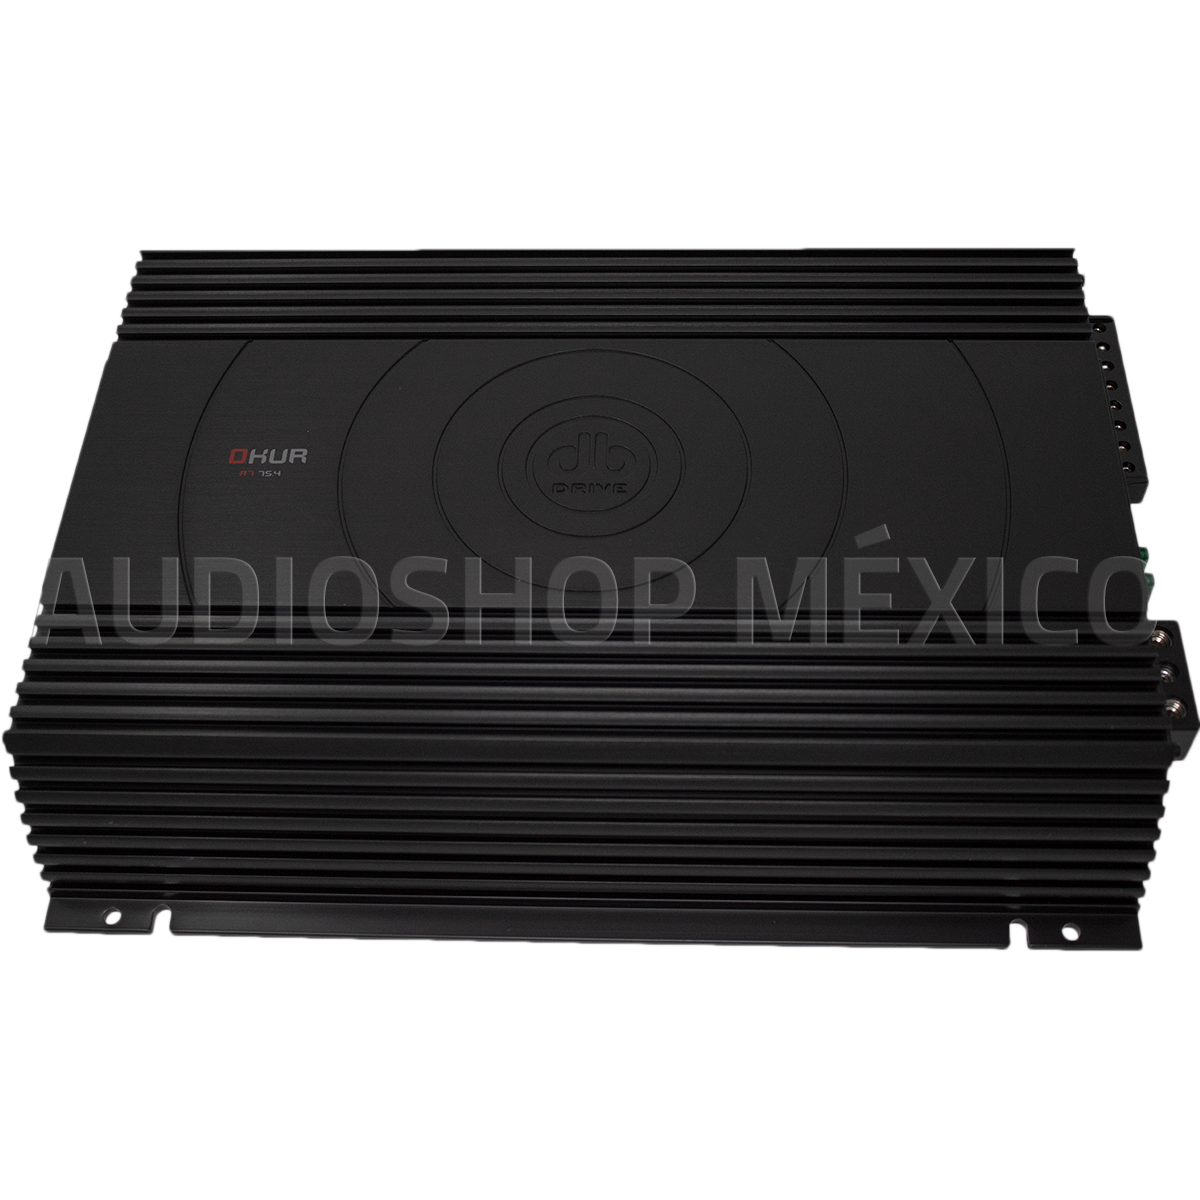 Amplificador 4 Canales DB Drive A7 75.4 500 Watts Clase AB 2 Ohms Open Show SPL Okur Series